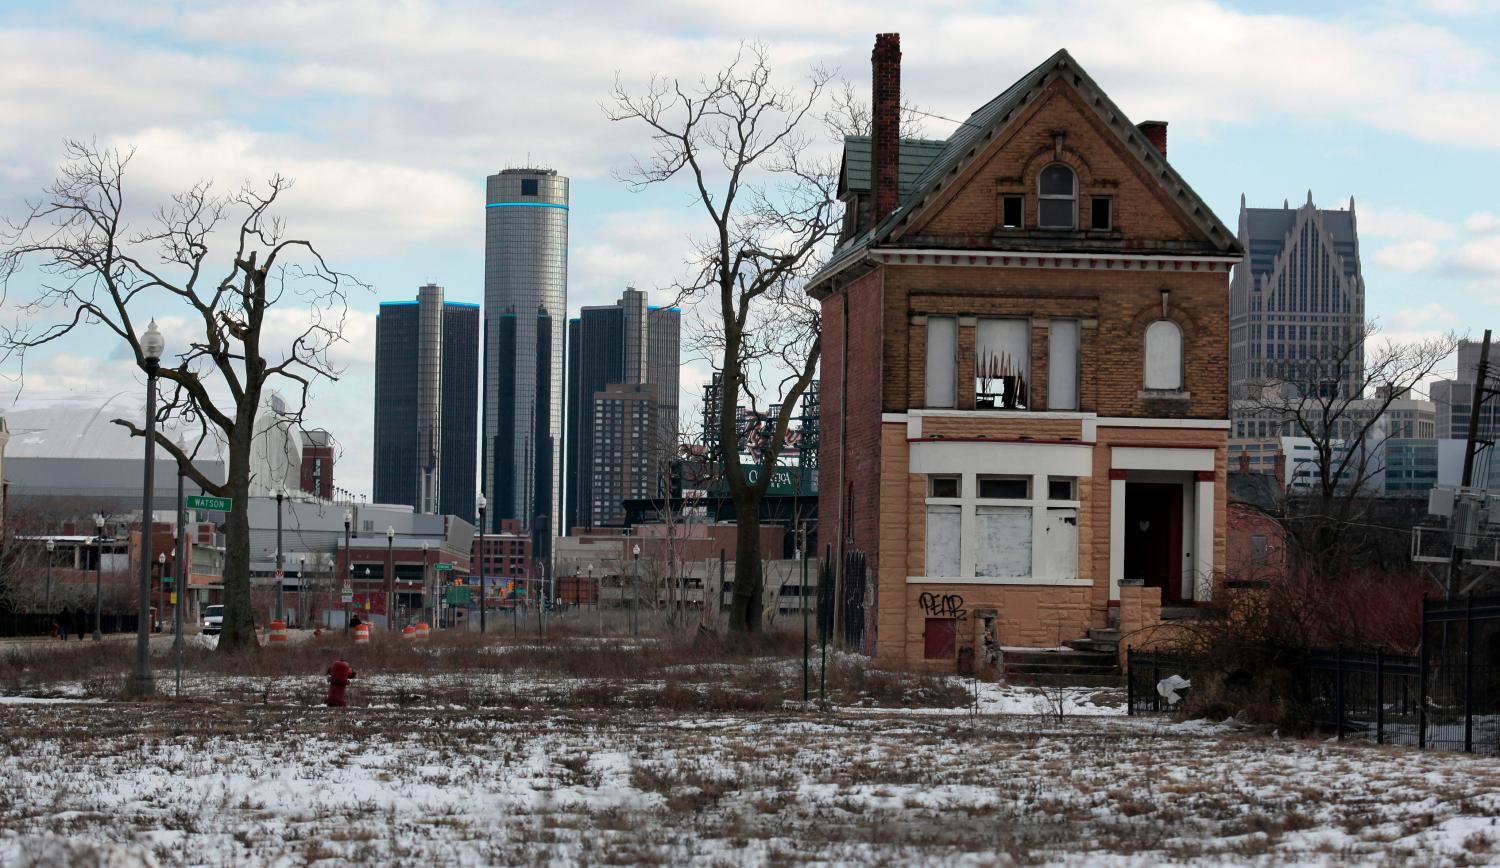 A vacant, boarded up house is seen in the once thriving Brush Park neighborhood with the downtown Detroit skyline behind it in Detroit, Michigan March 3, 2013. Michigan Governor Rick Snyder cleared the way for a state takeover of Detroit, declaring that the birthplace of the U.S. automotive industry faces a fiscal emergency and that he has identified a top candidate to assume its management. Friday's declaration by the Republican governor virtually assures that the state of Michigan will assume control of Detroit's books, and eventually decide whether the city should file the largest municipal bankruptcy in U.S. history.   REUTERS/ Rebecca Cook  (UNITED STATES - Tags: CITYSCAPE REAL ESTATE BUSINESS POLITICS)